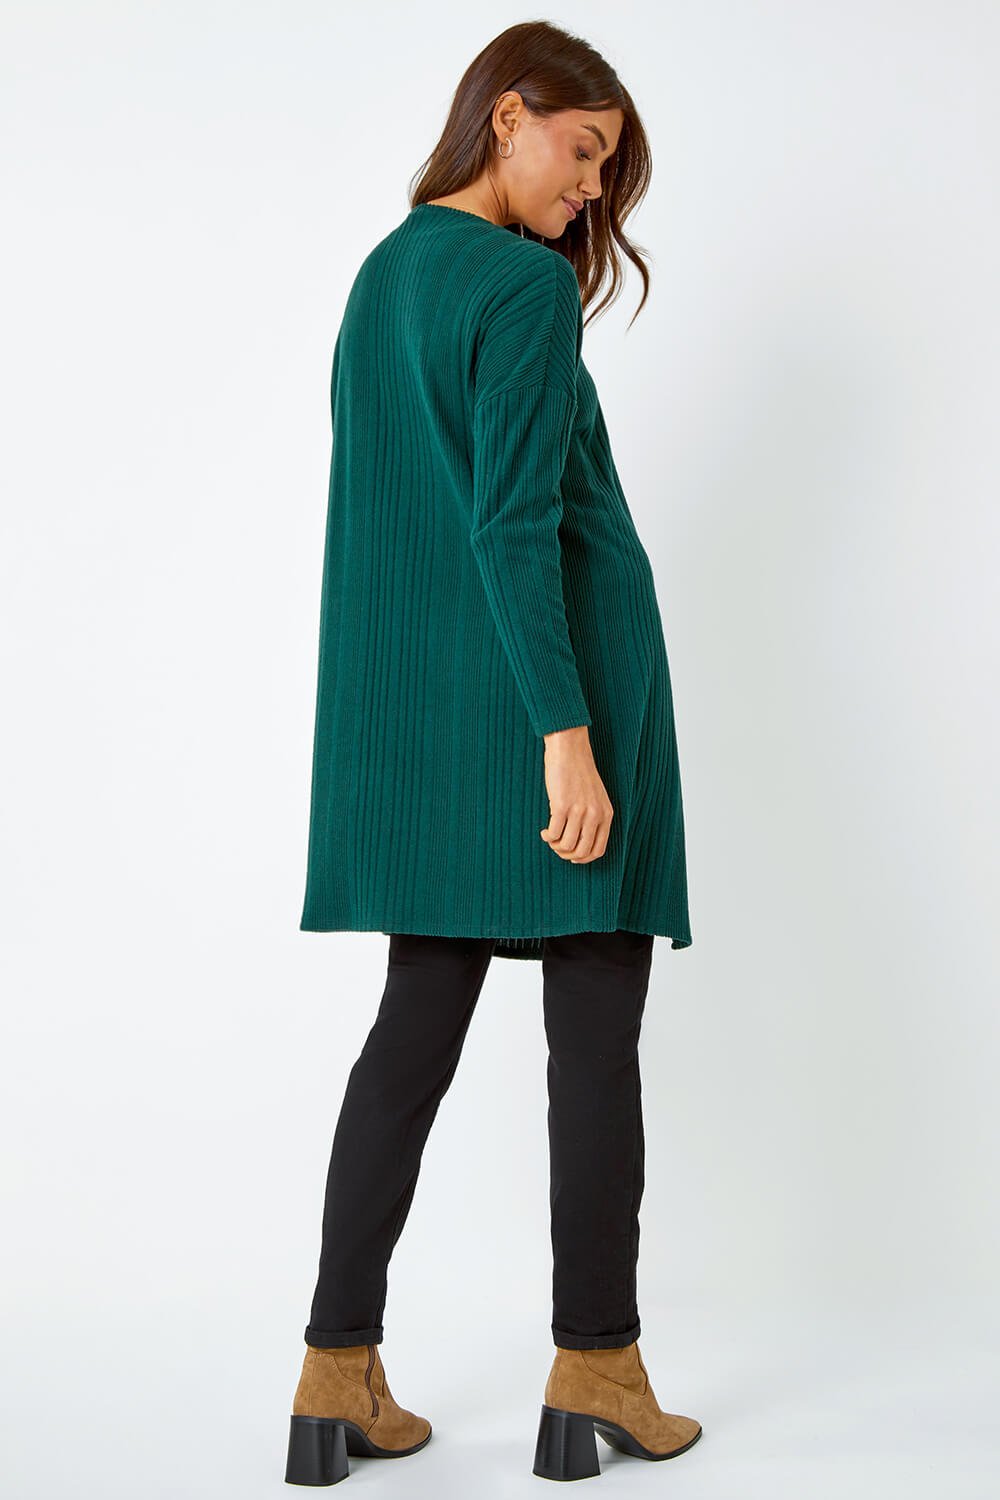 Green Ribbed Longline Stretch Knit Cardigan, Image 3 of 5